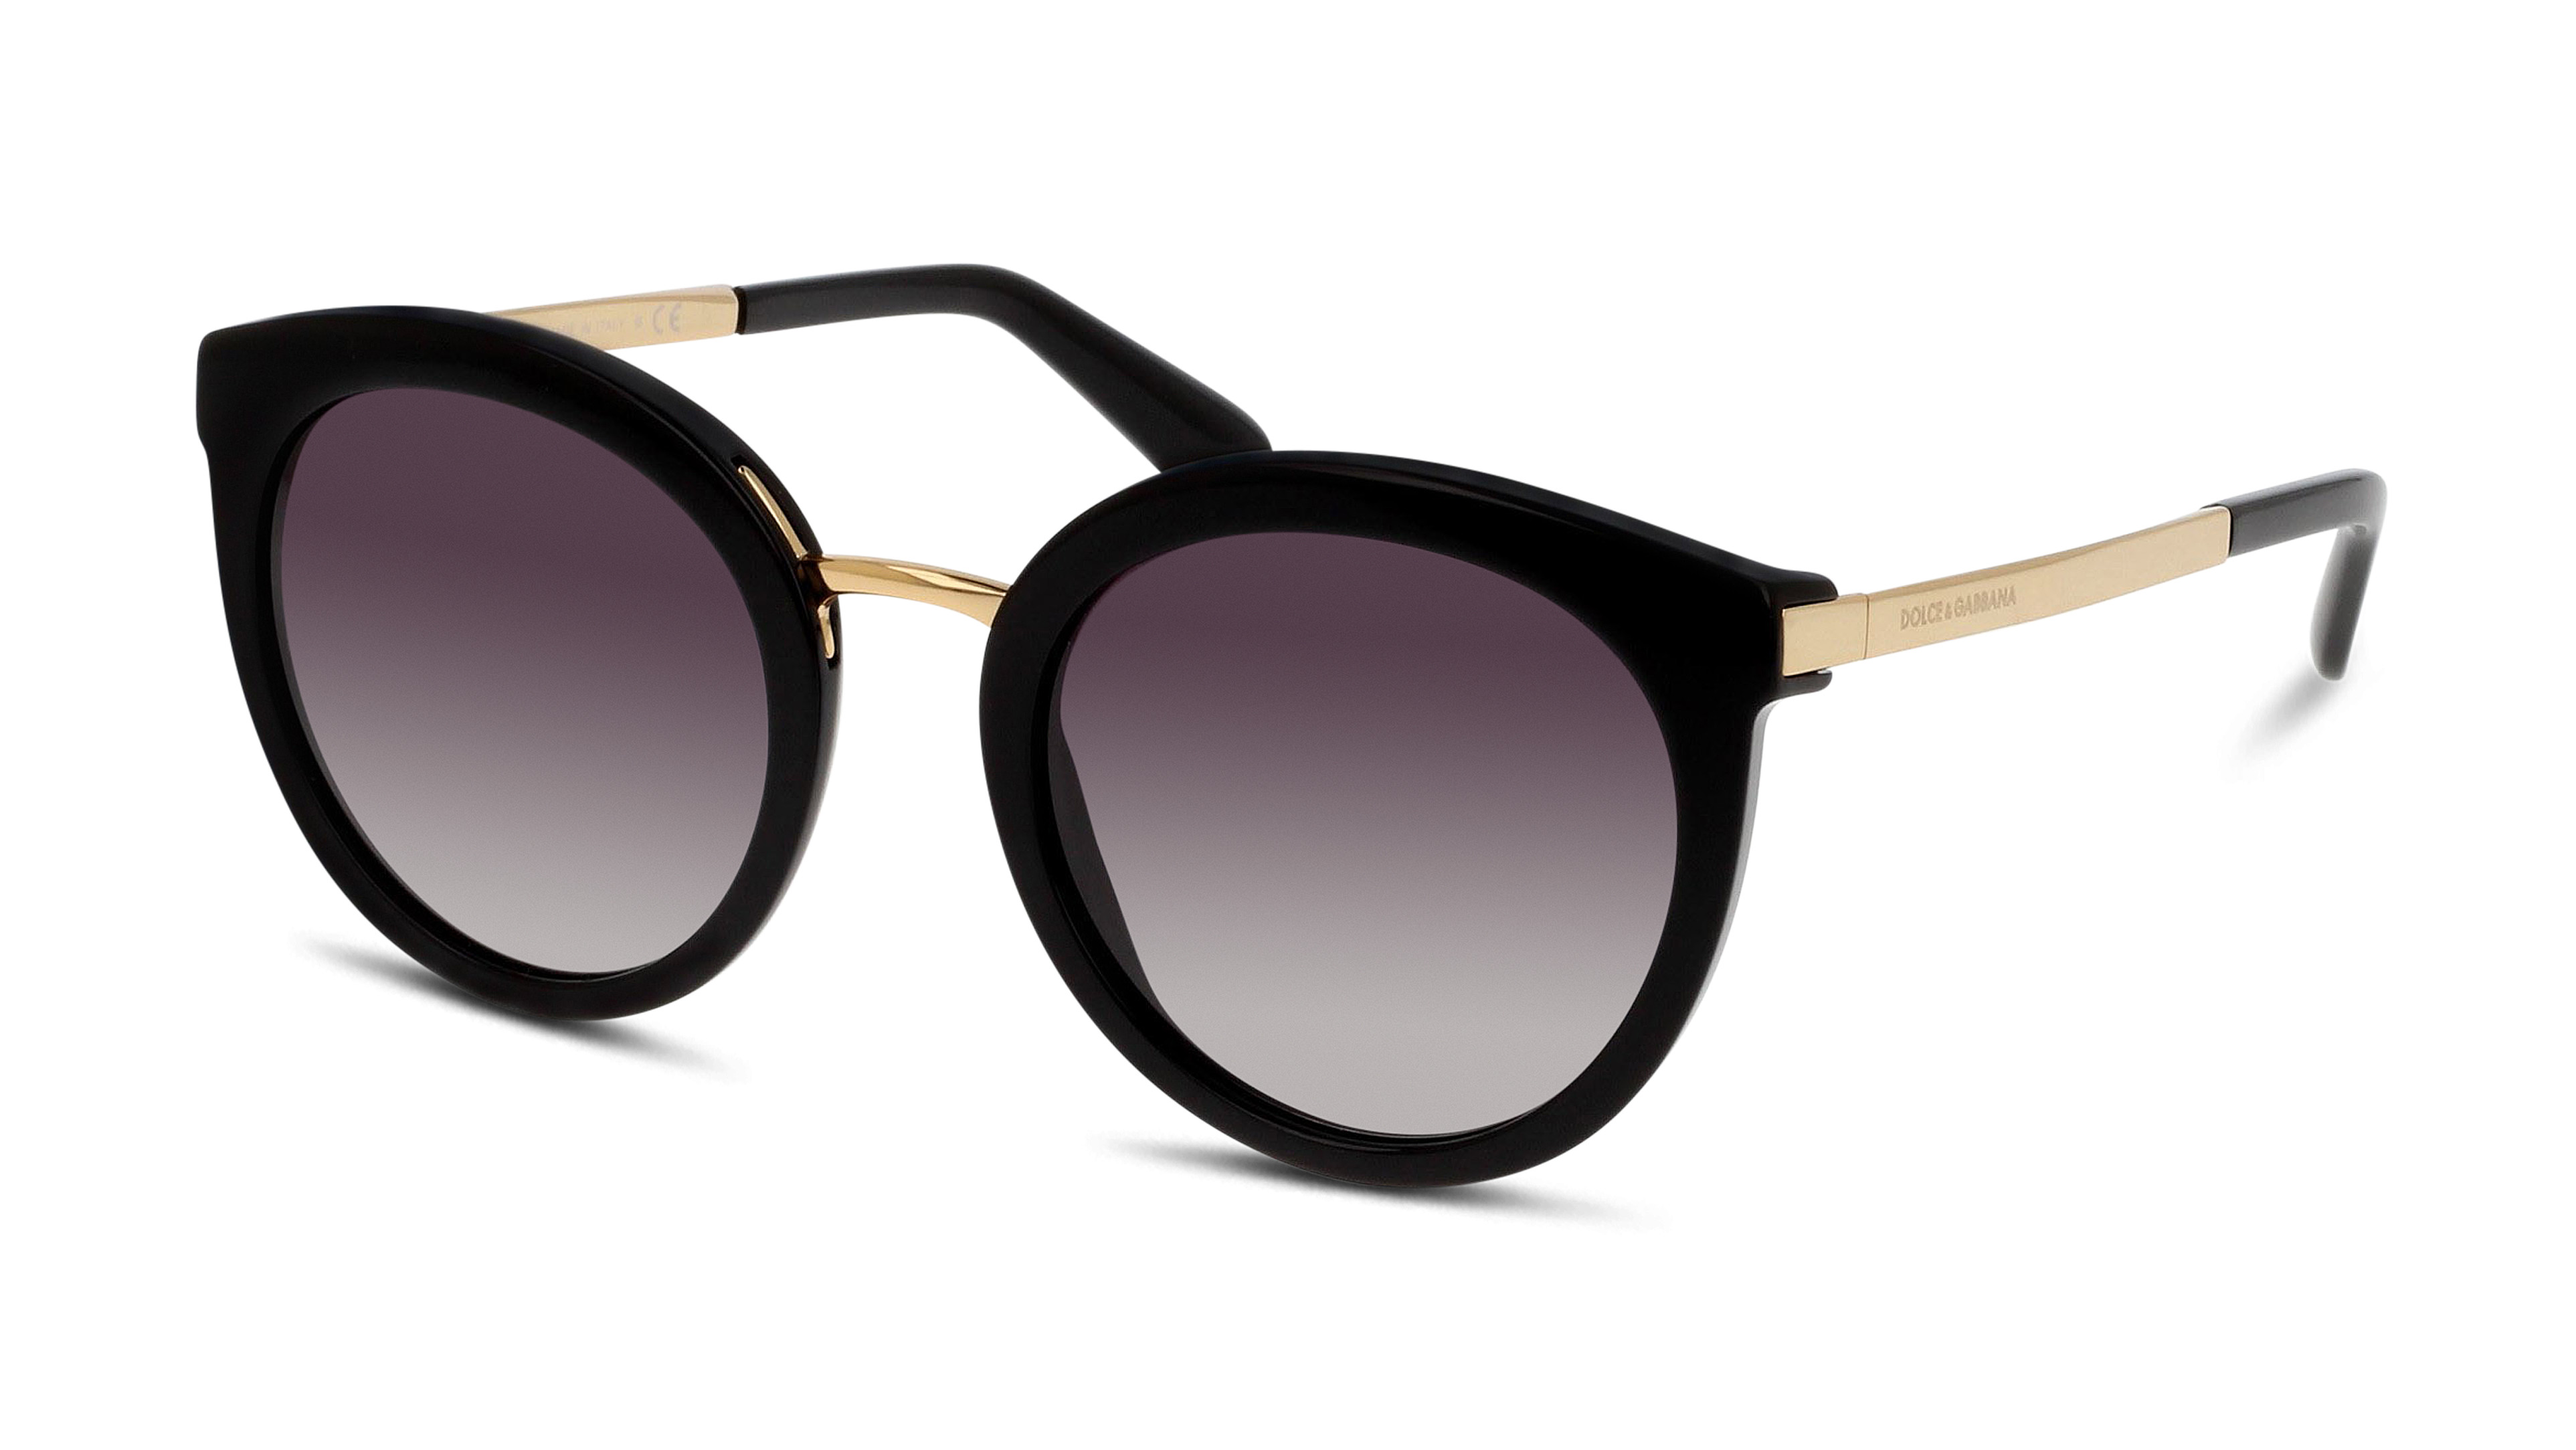 [products.image.angle_left01] Dolce&Gabbana 0DG4268 501/8G Sonnenbrille